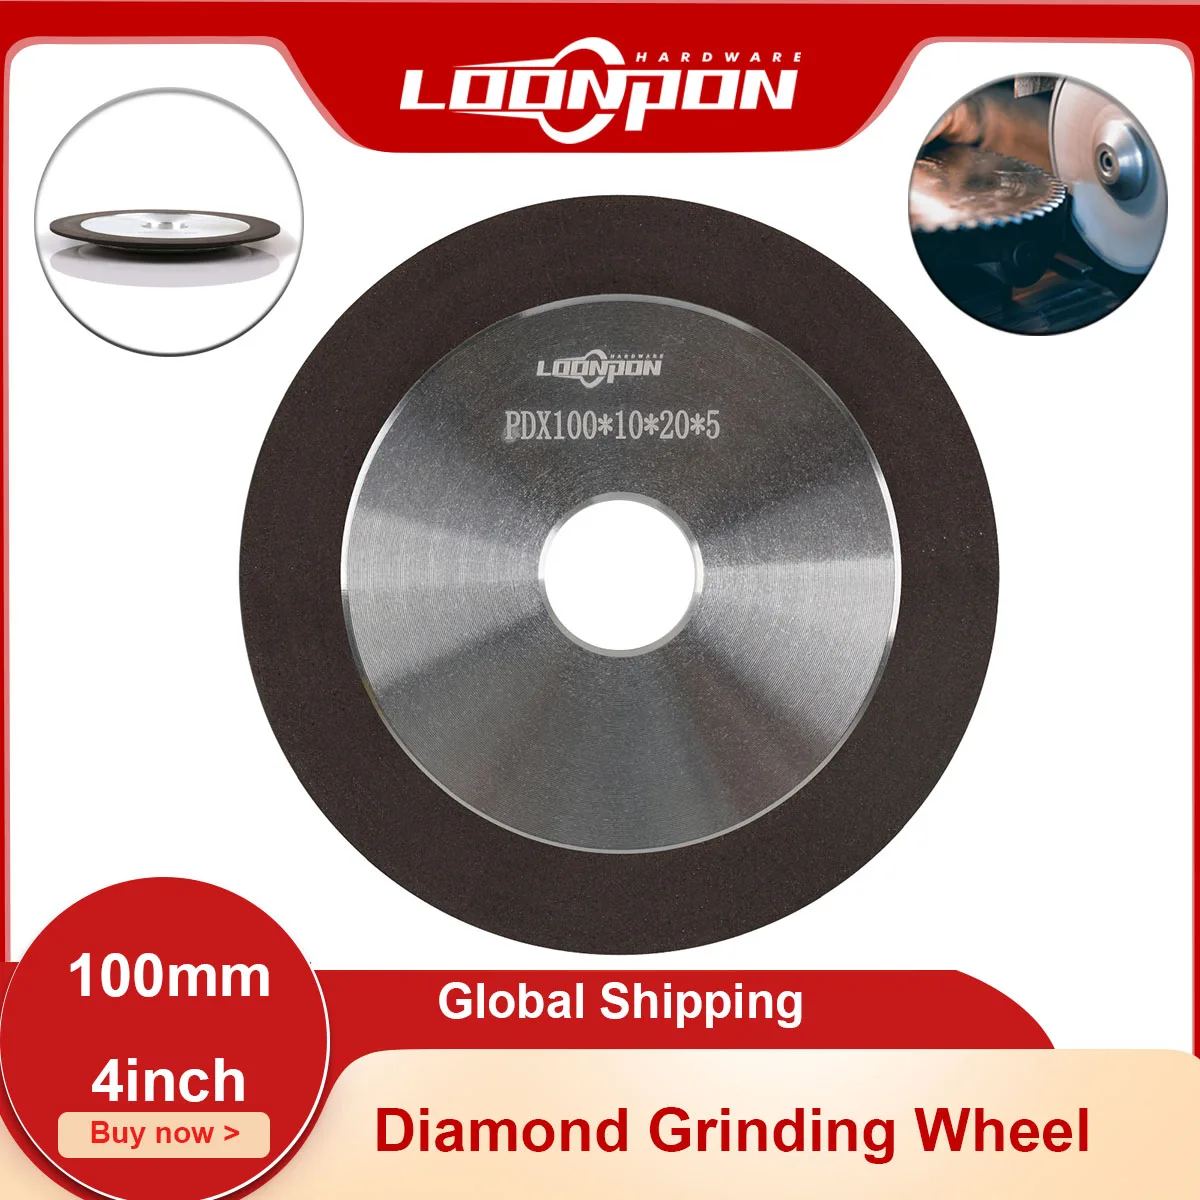 100mm/4inch Diamond Grinding Wheel Grinding Circle Grit 150 for Tungsten Steel Milling Cutter Tool Sharpener Grinder tungsten electrode sharpener tungsten needles tungsten rods grinder